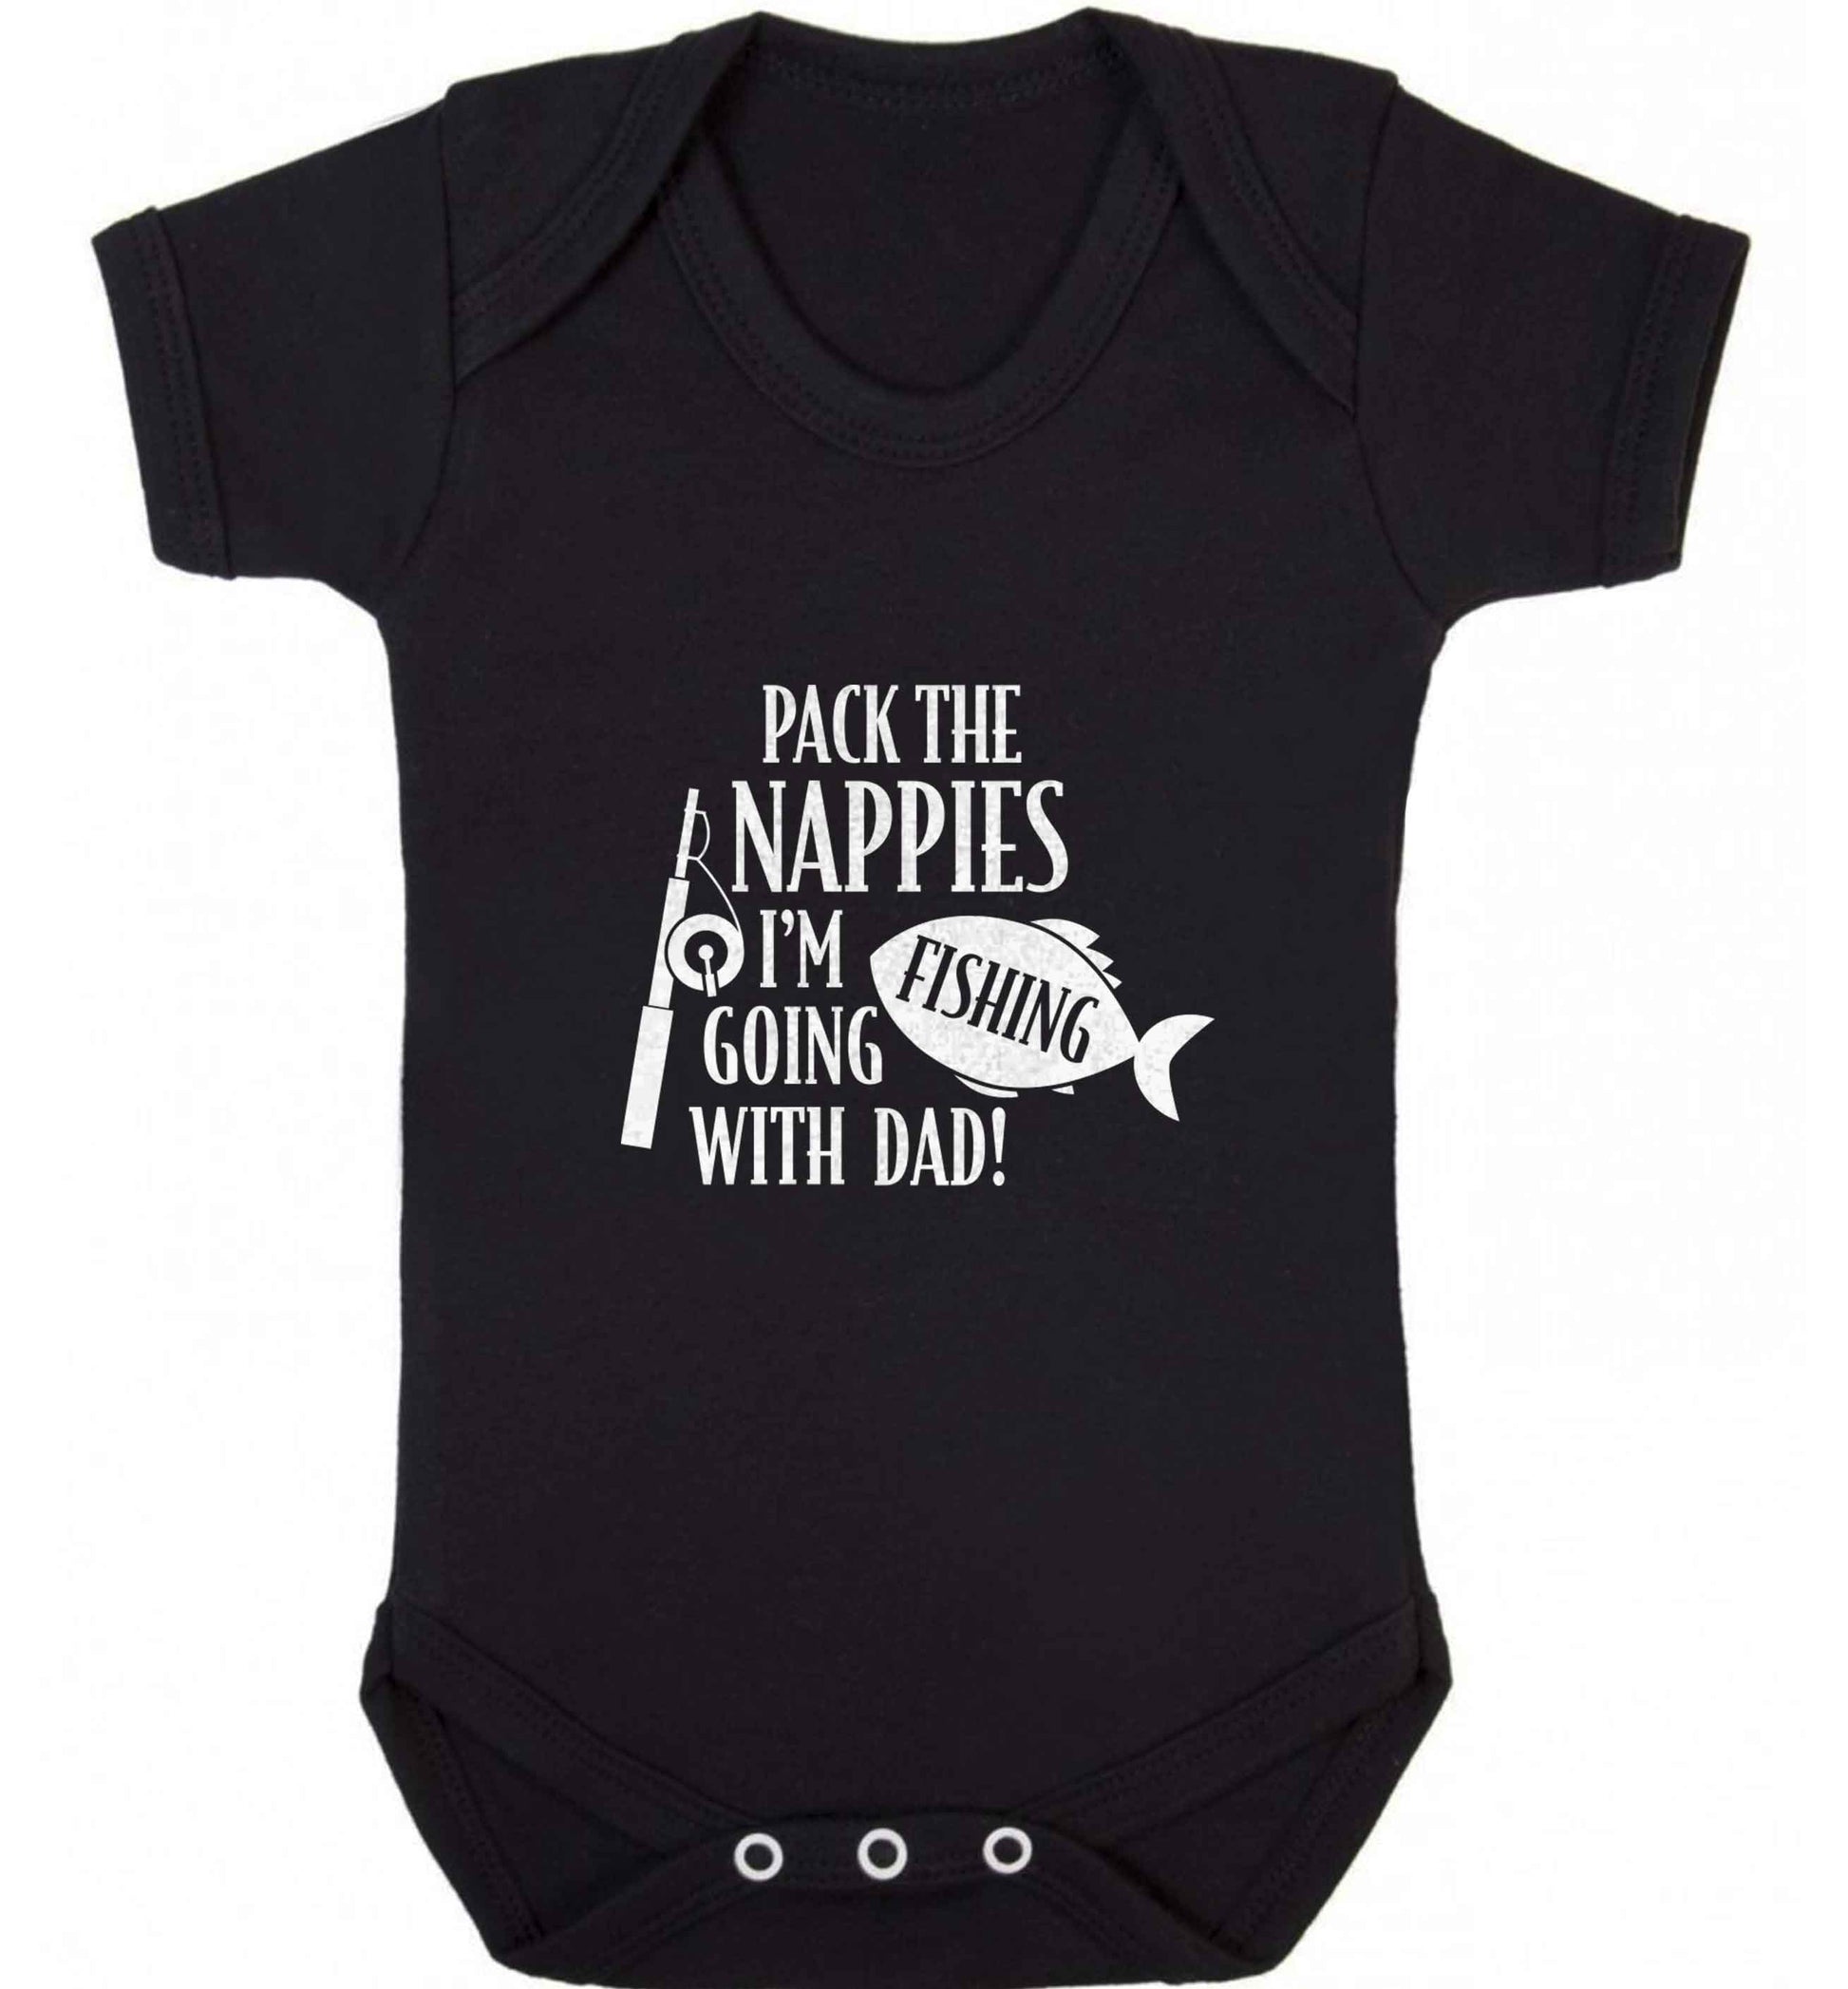 Pack the nappies I'm going fishing with Dad baby vest black 18-24 months